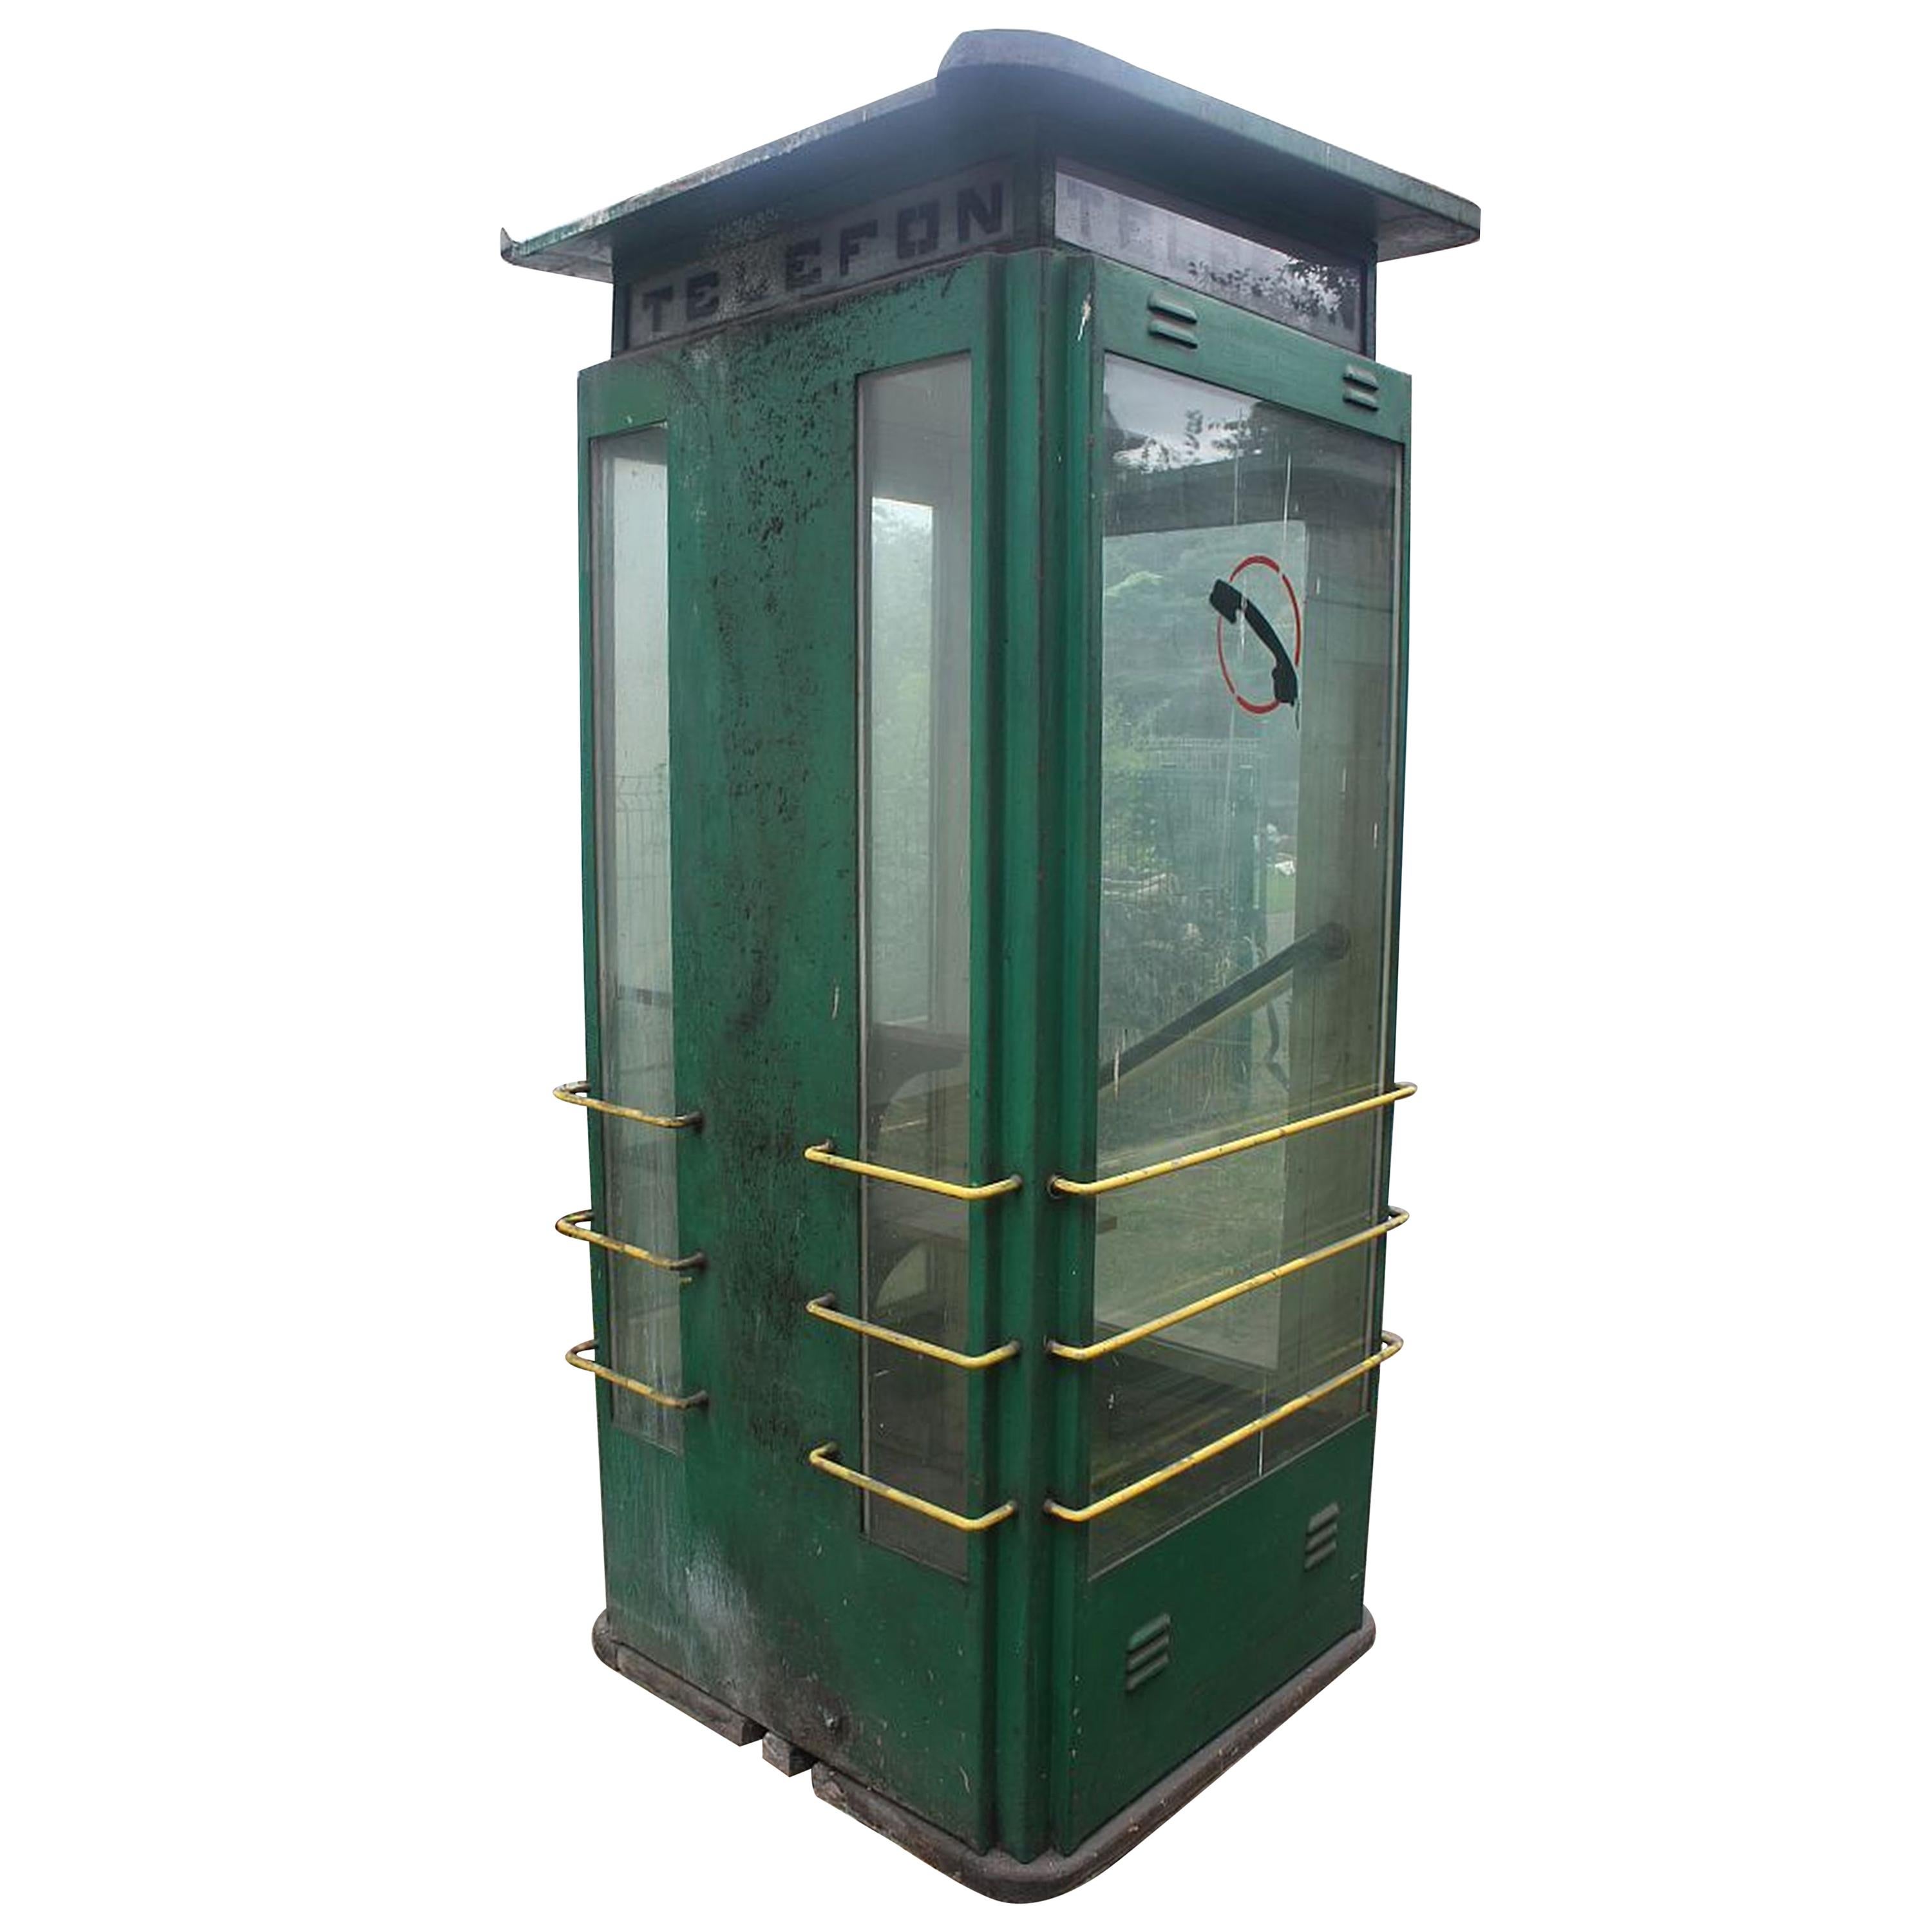 1967 Vintage Telephone Booth For Sale